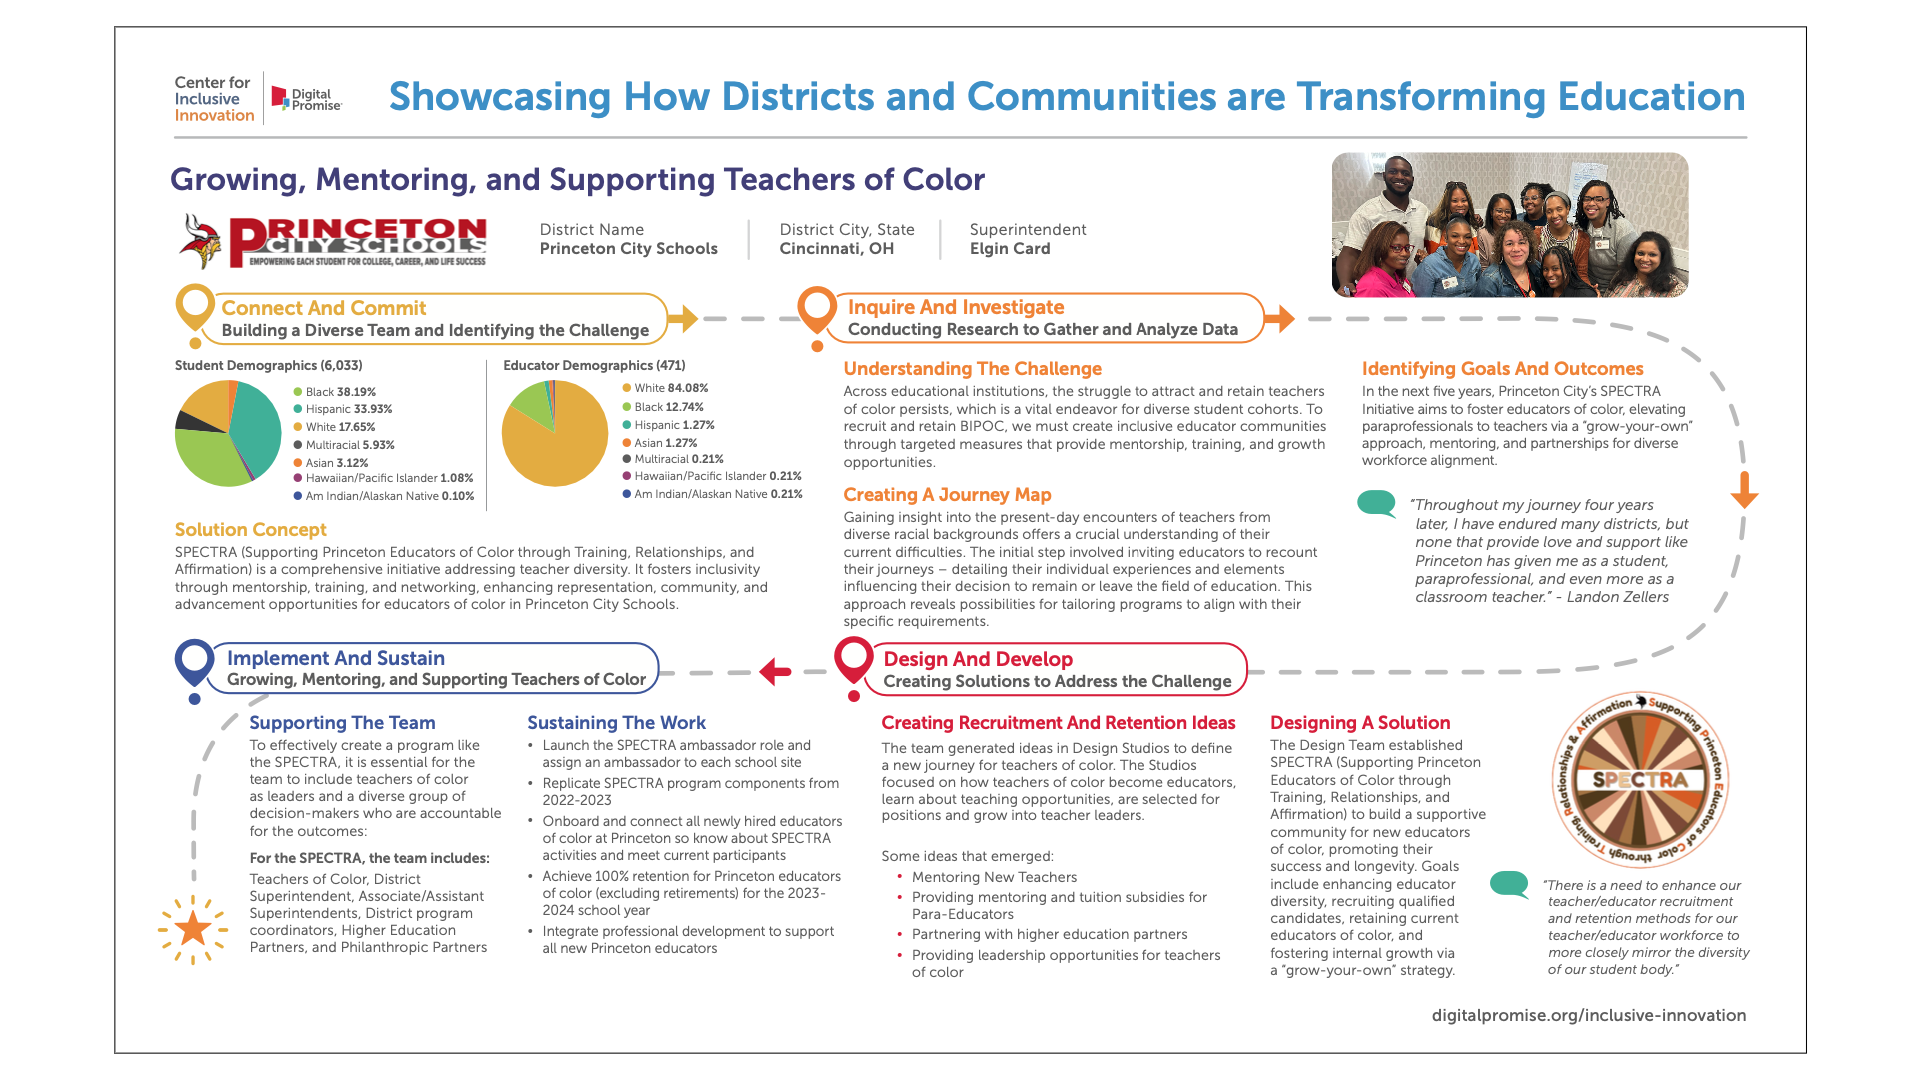 Growing, Mentoring, and Supporting Teachers of Color - Princeton City Schools